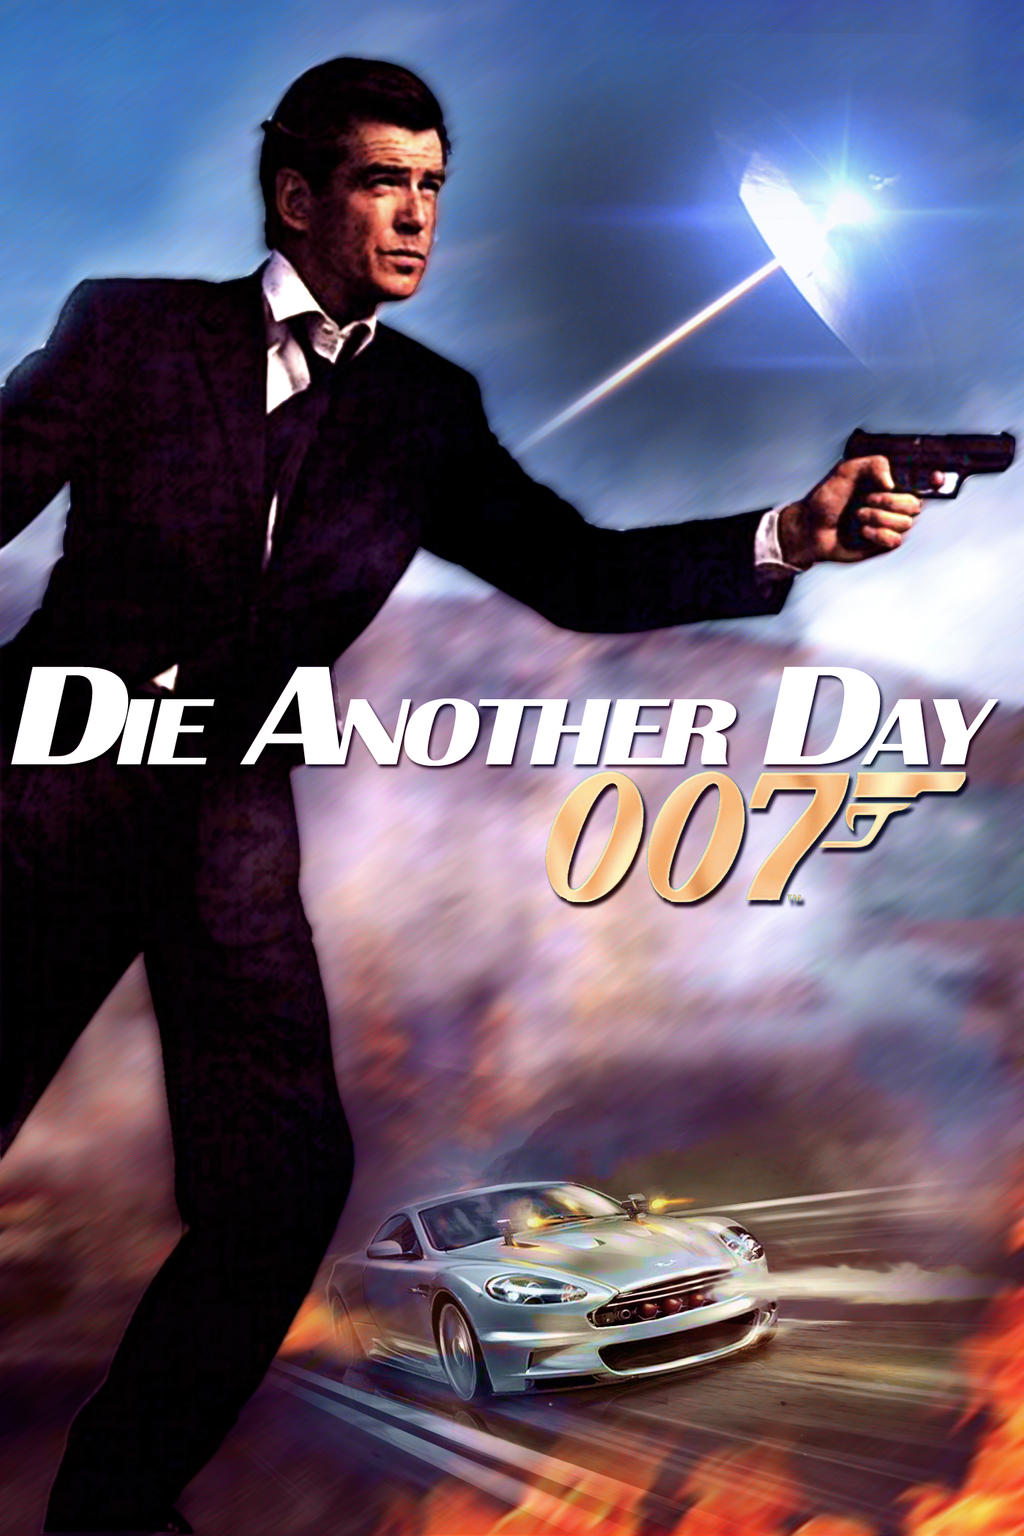 Die Another Day Blu-ray cover. by comandercool22 on DeviantArt